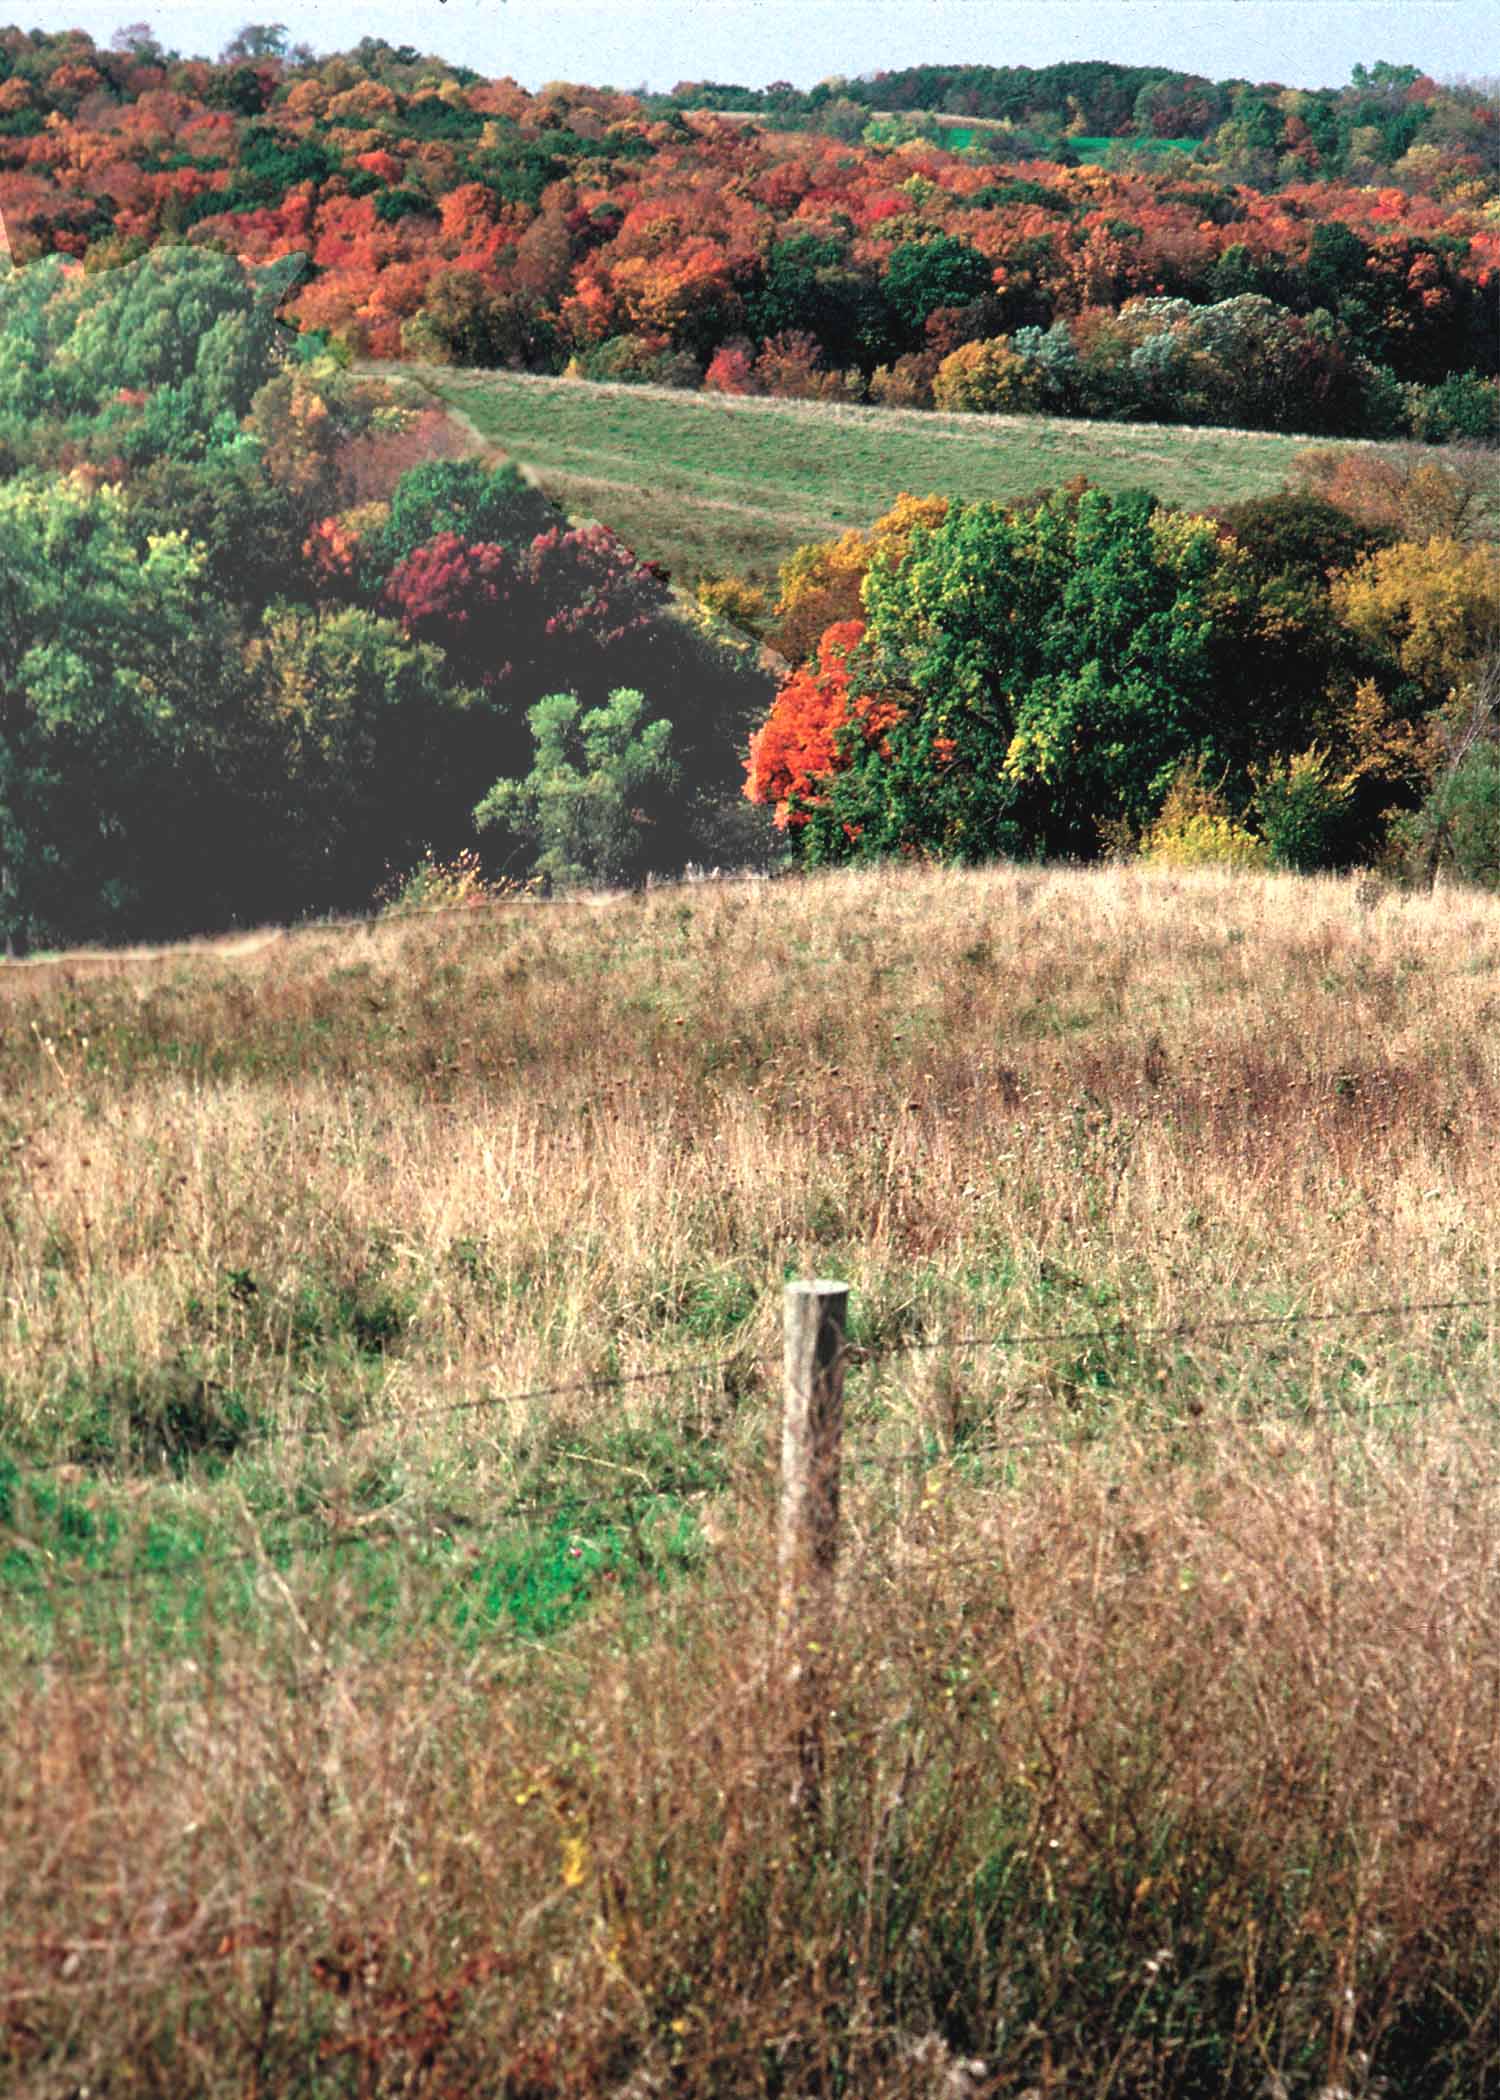 Healthy forest land in Iowa. The Healthy Forests Reserve Program produces a bounty of environmental, public health, and economic benefits for people, ecosystems, and communities. The public has an opportunity to comment on the latest proposed rule for this important program.